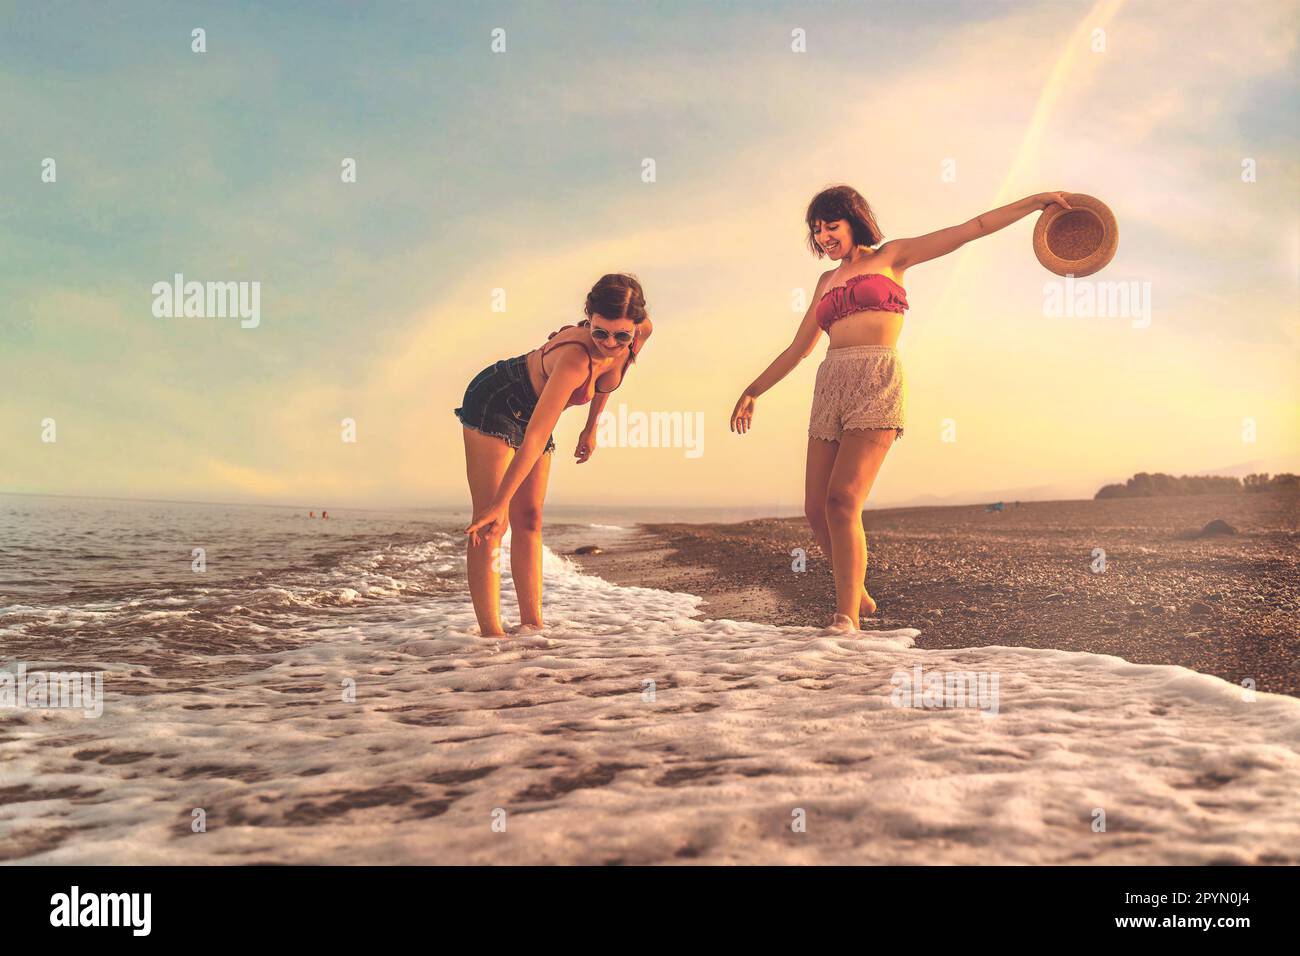 Two young Caucasian young women in their twenties, wearing shorts and bikinis, playfully splash water on their feet at the beach during sunset. One ho Stock Photo